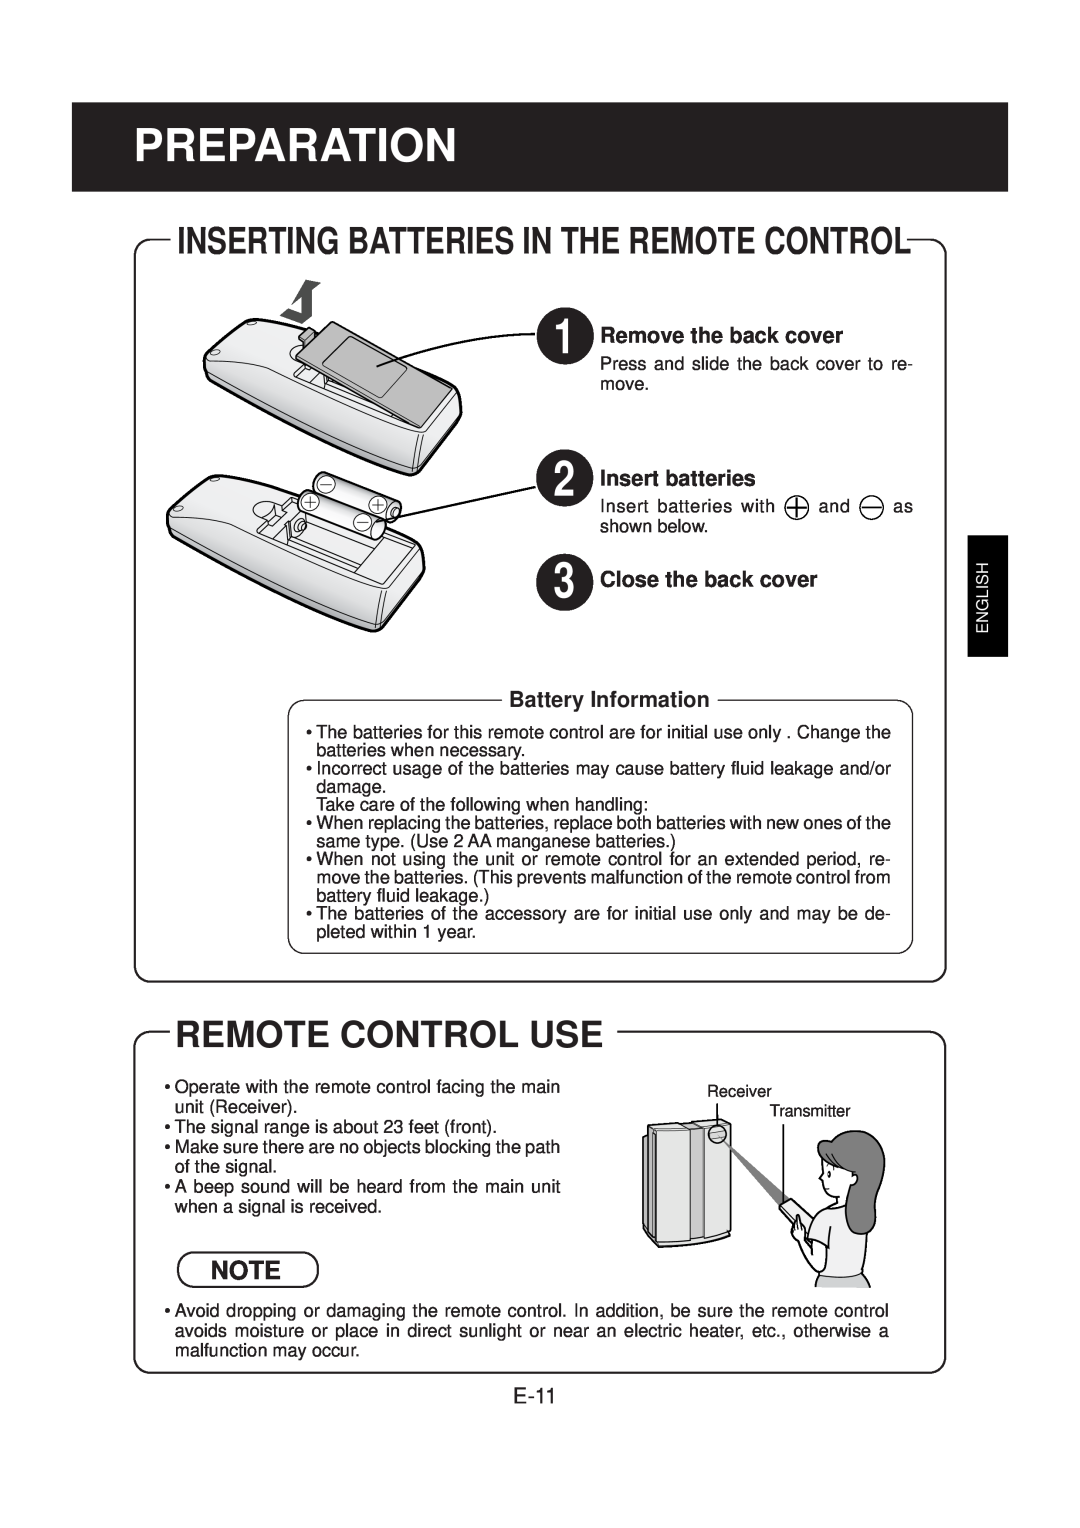 Sharp FP-N60CX operation manual Preparation, Remote Control Use, Inserting Batteries In The Remote Control, E-11 